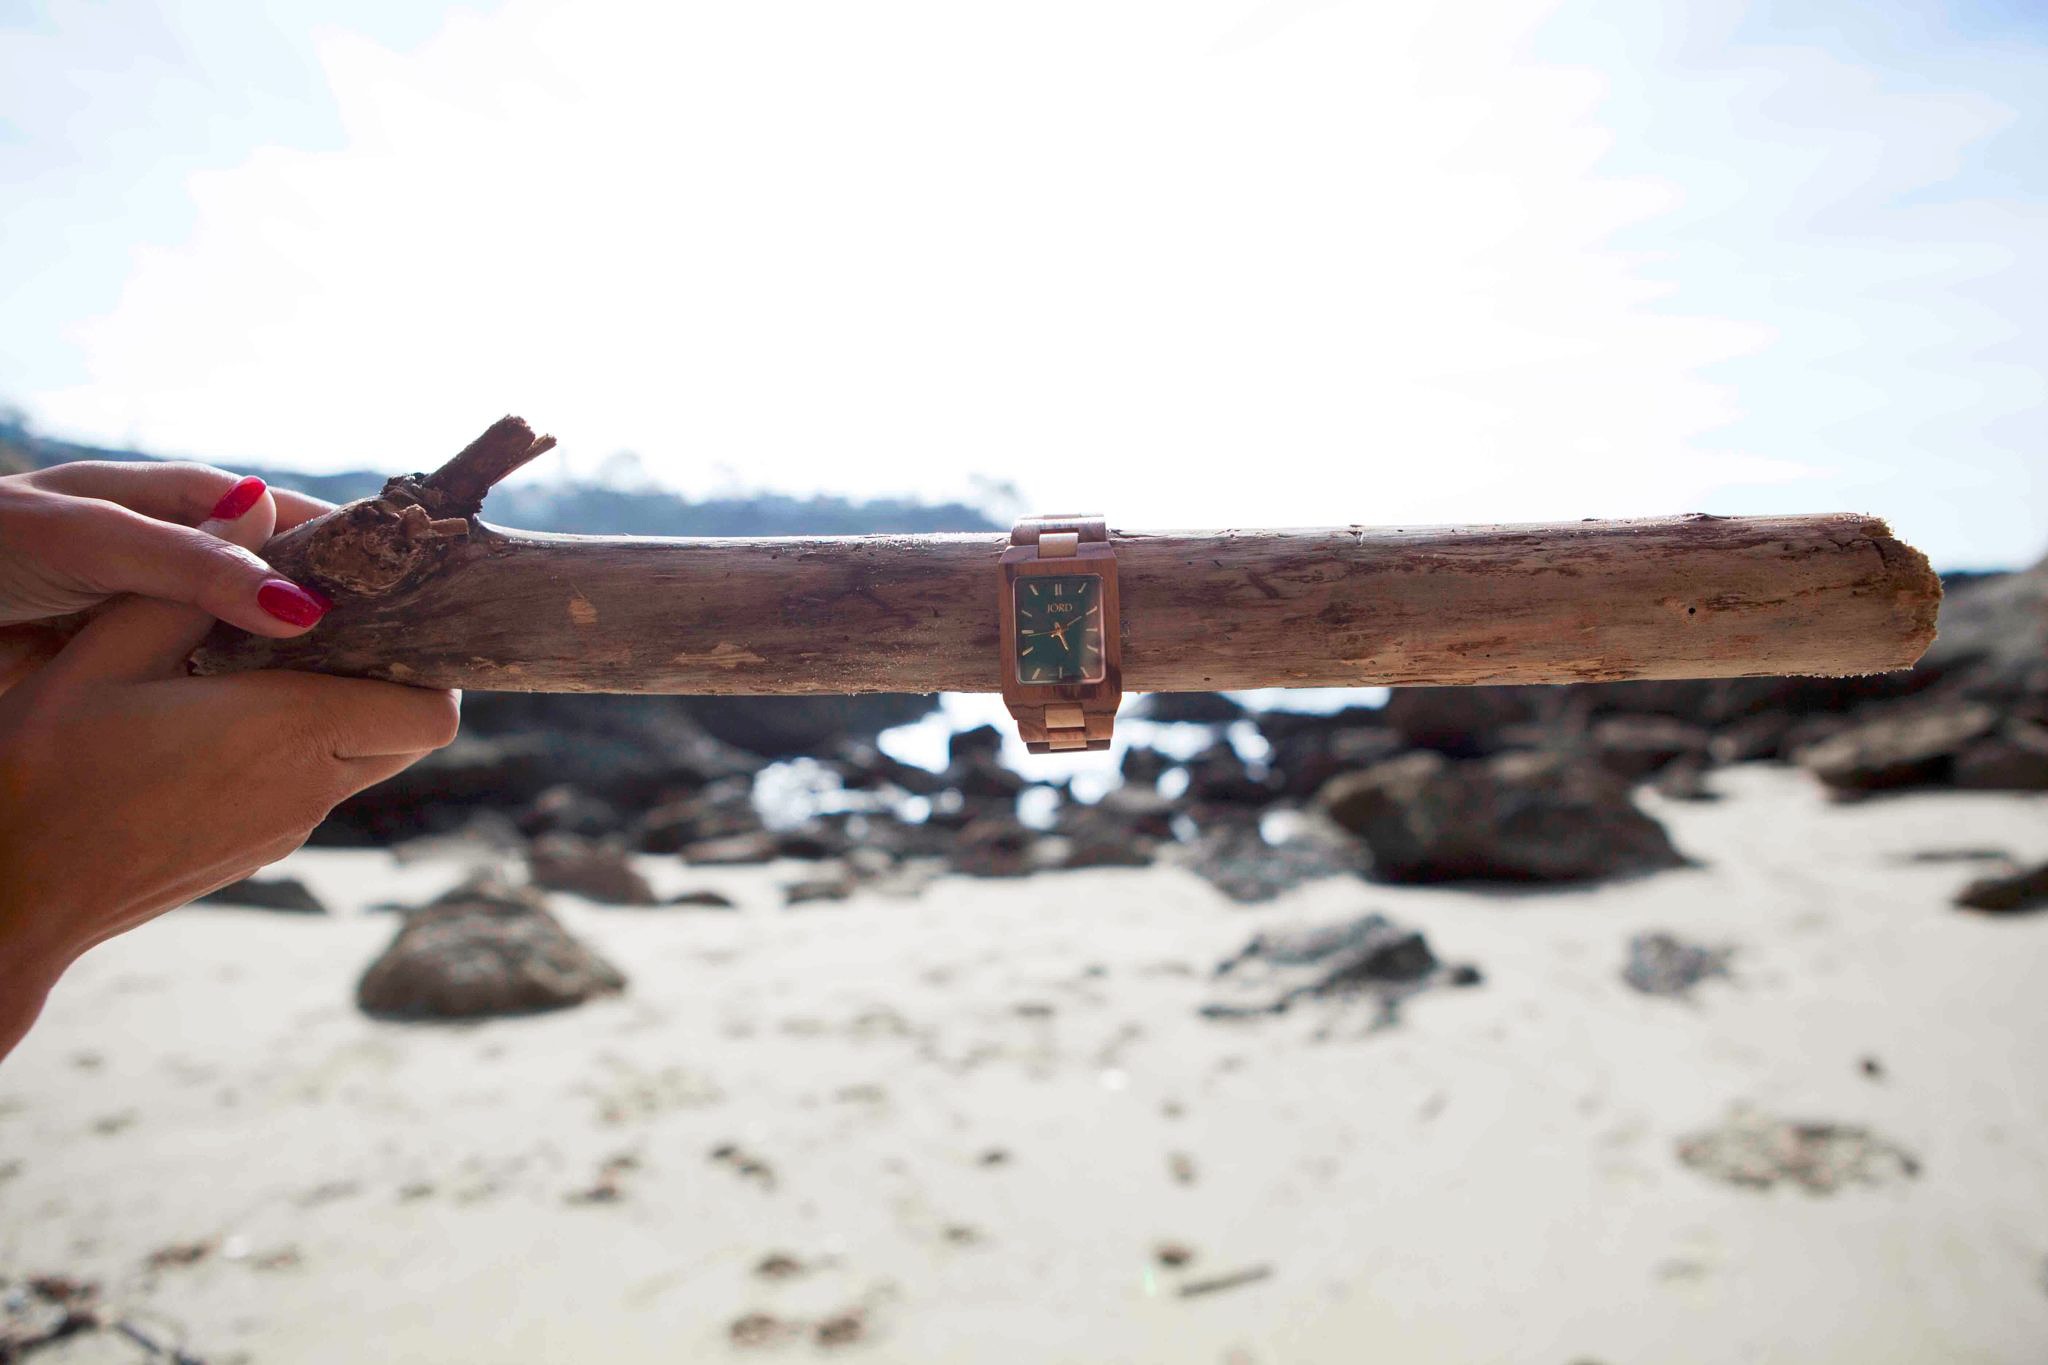 Debbie Savage of To Thine Own Style Be True is sharing her love for Jord Wood Watches at Three Arch Bay in Laguna Beach, California